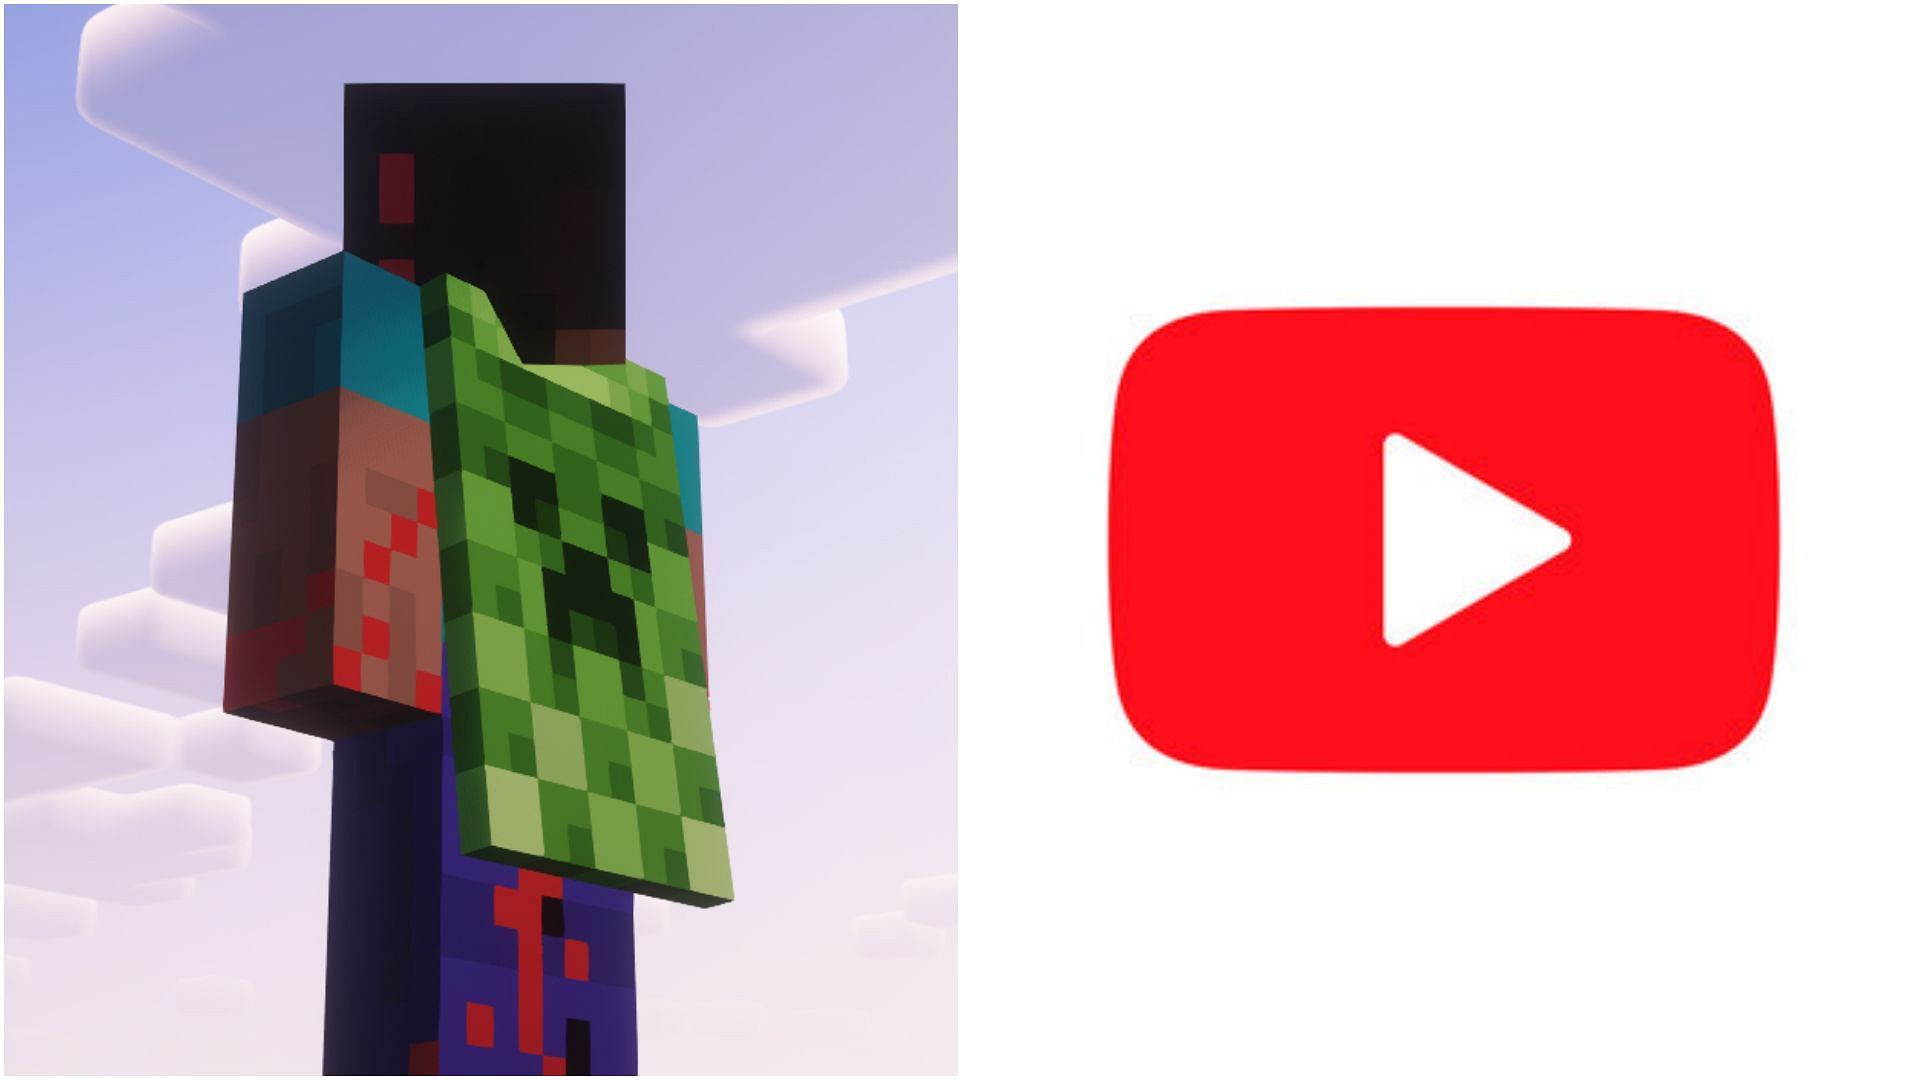 Mojang Studios could have made a YouTube cape for Minecraft 15th anniversary (Collage via Sportskeeda)